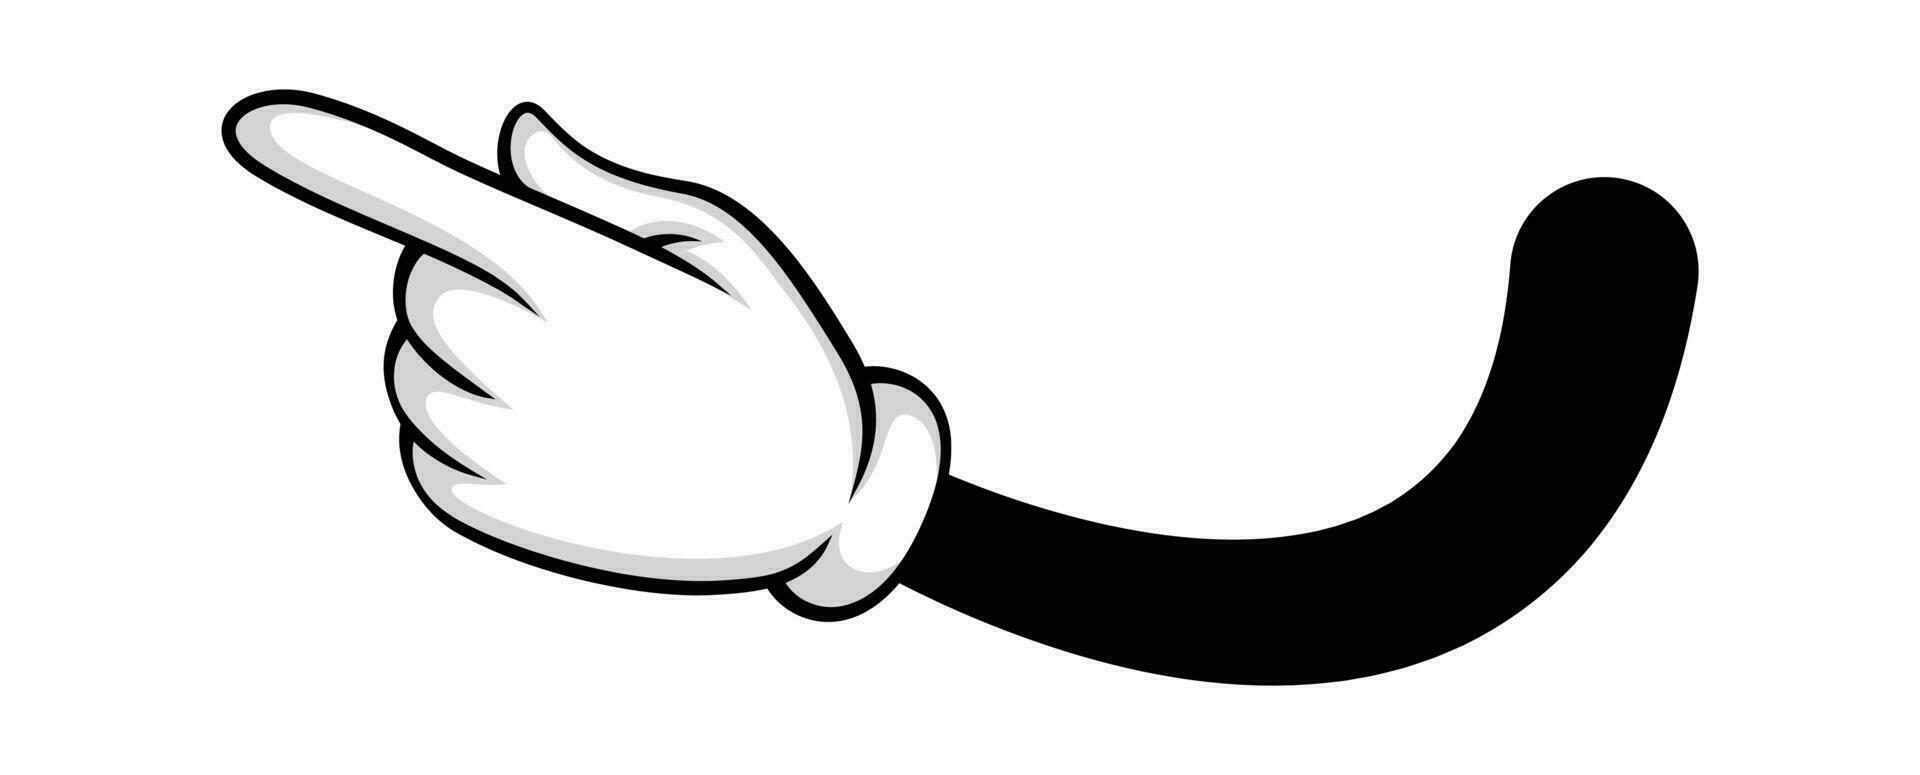 Direct to left, cartoon hand show right way vector